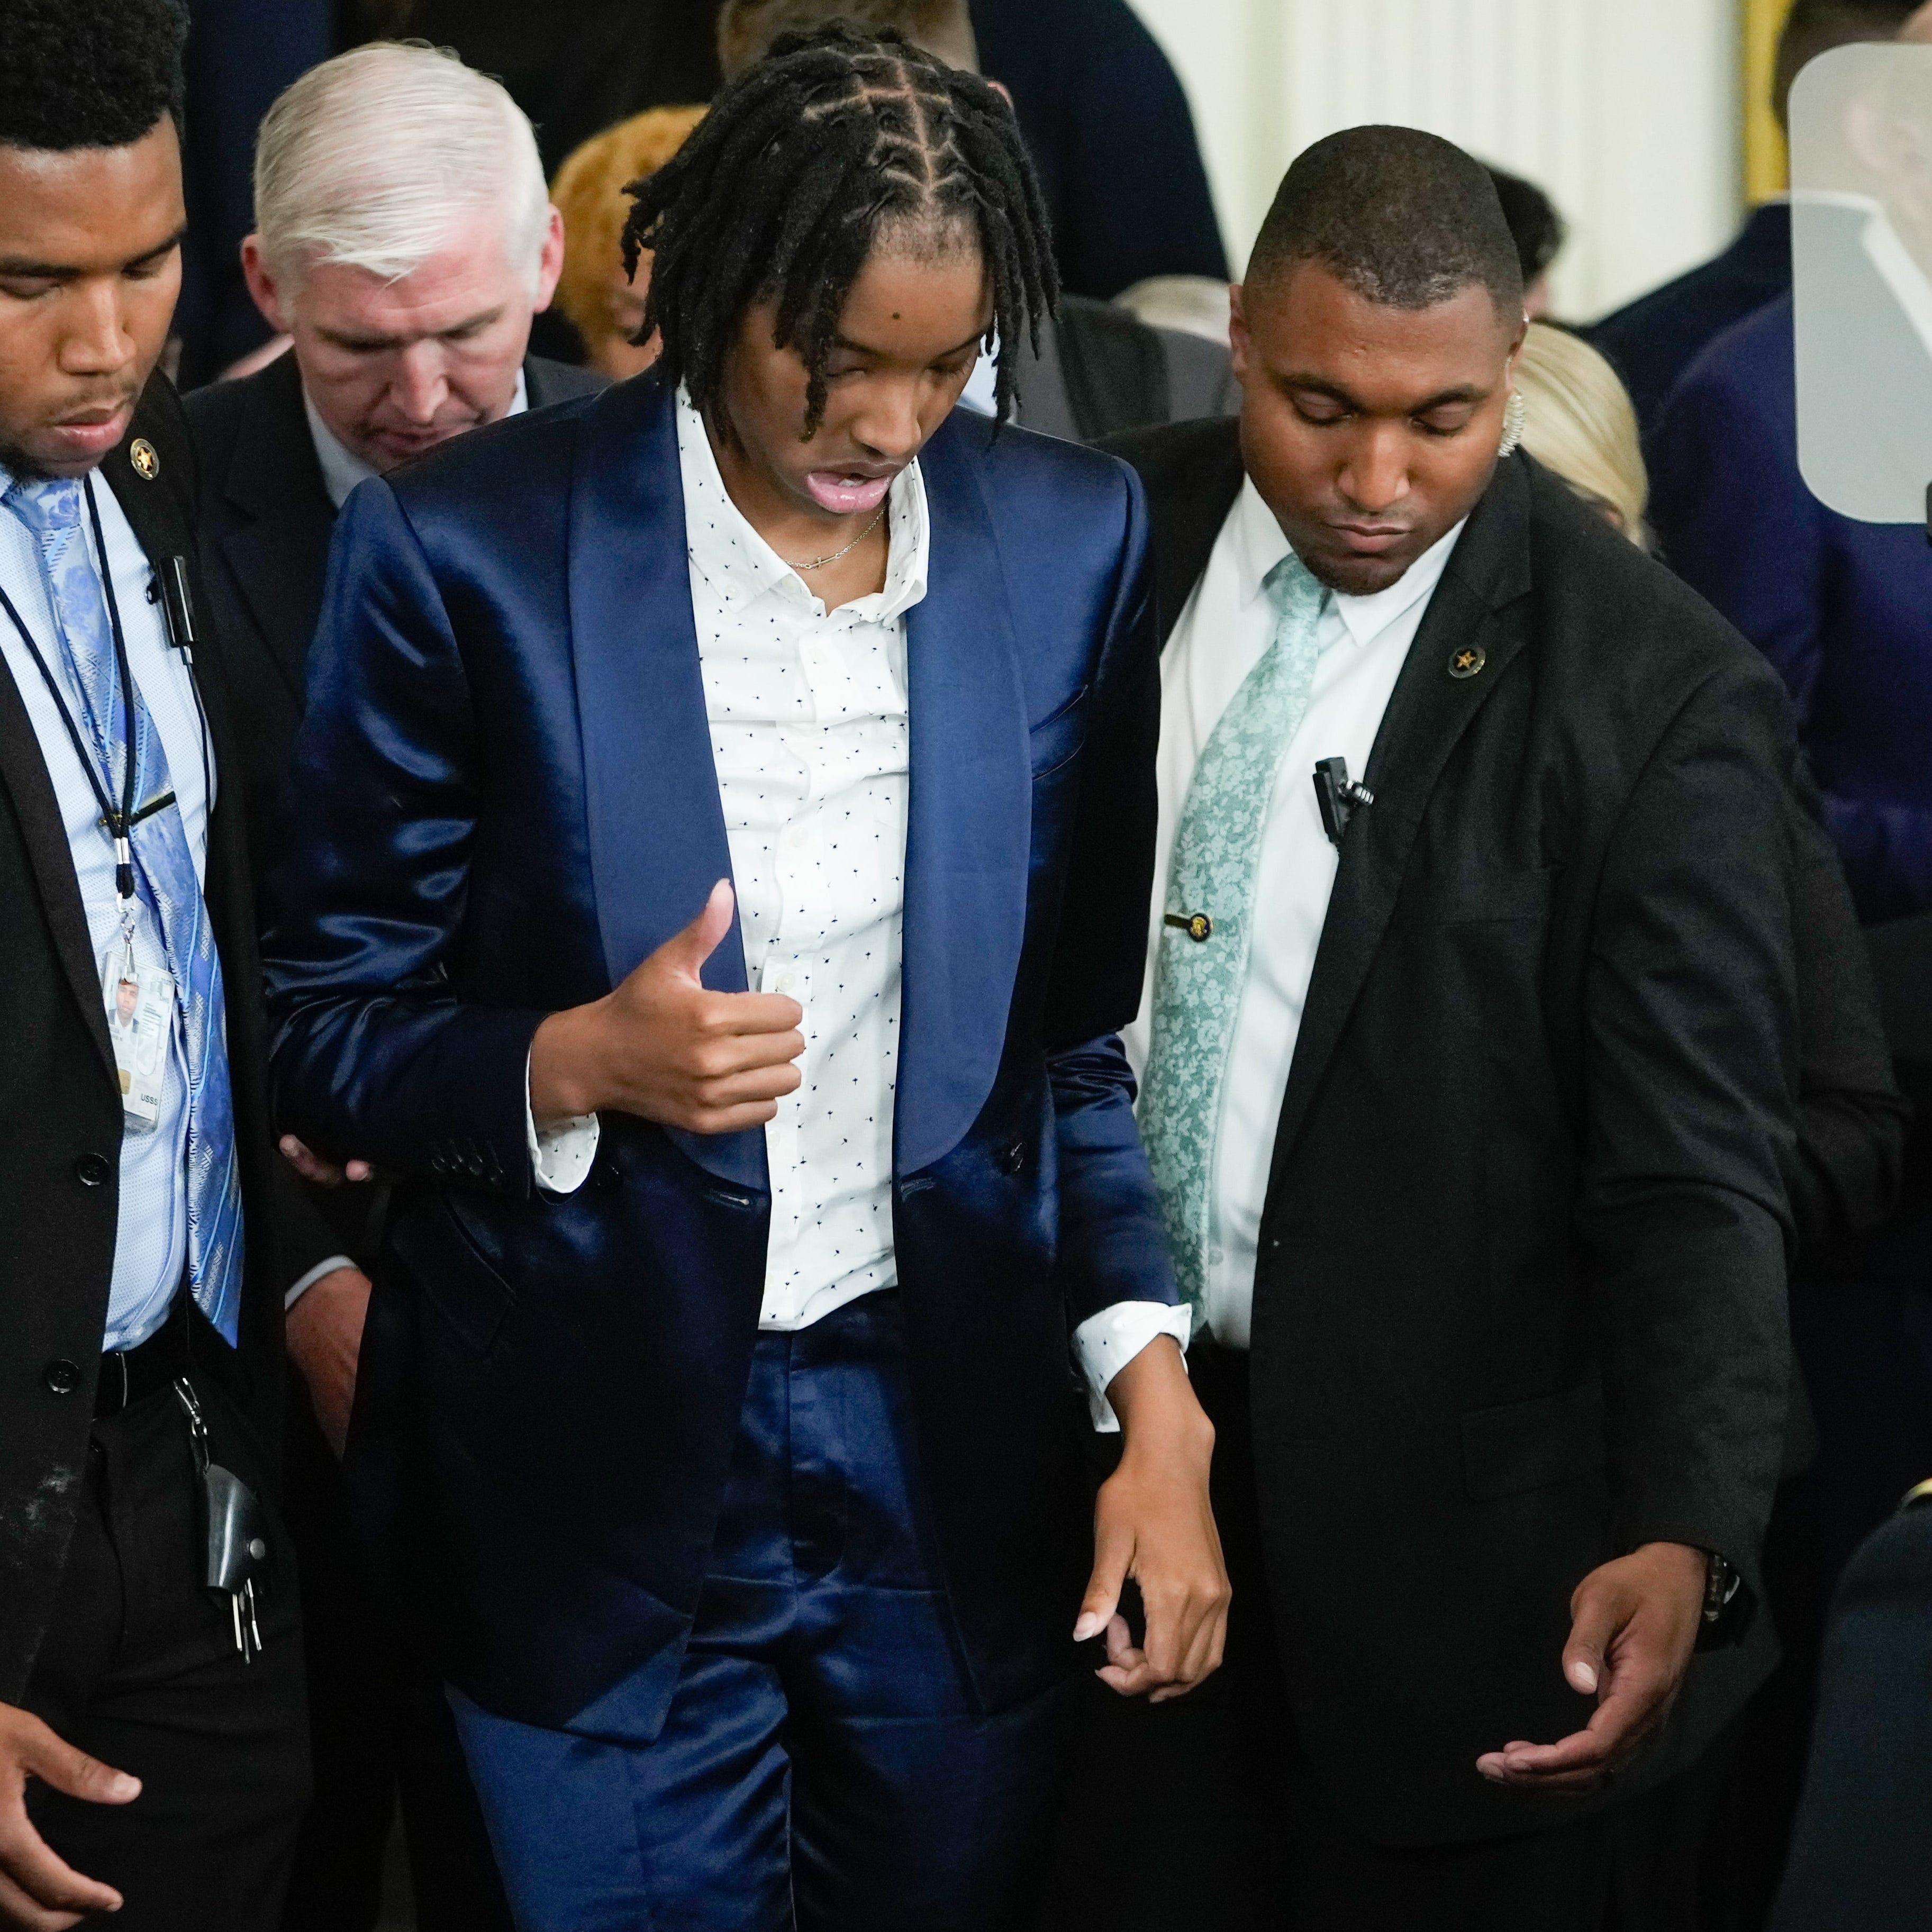 LSU women's basketball player Sa'Myah Smith, center, stands up after passing out during a White House ceremony honoring the team's national championship with President Joe Biden and first lady Jill Biden.